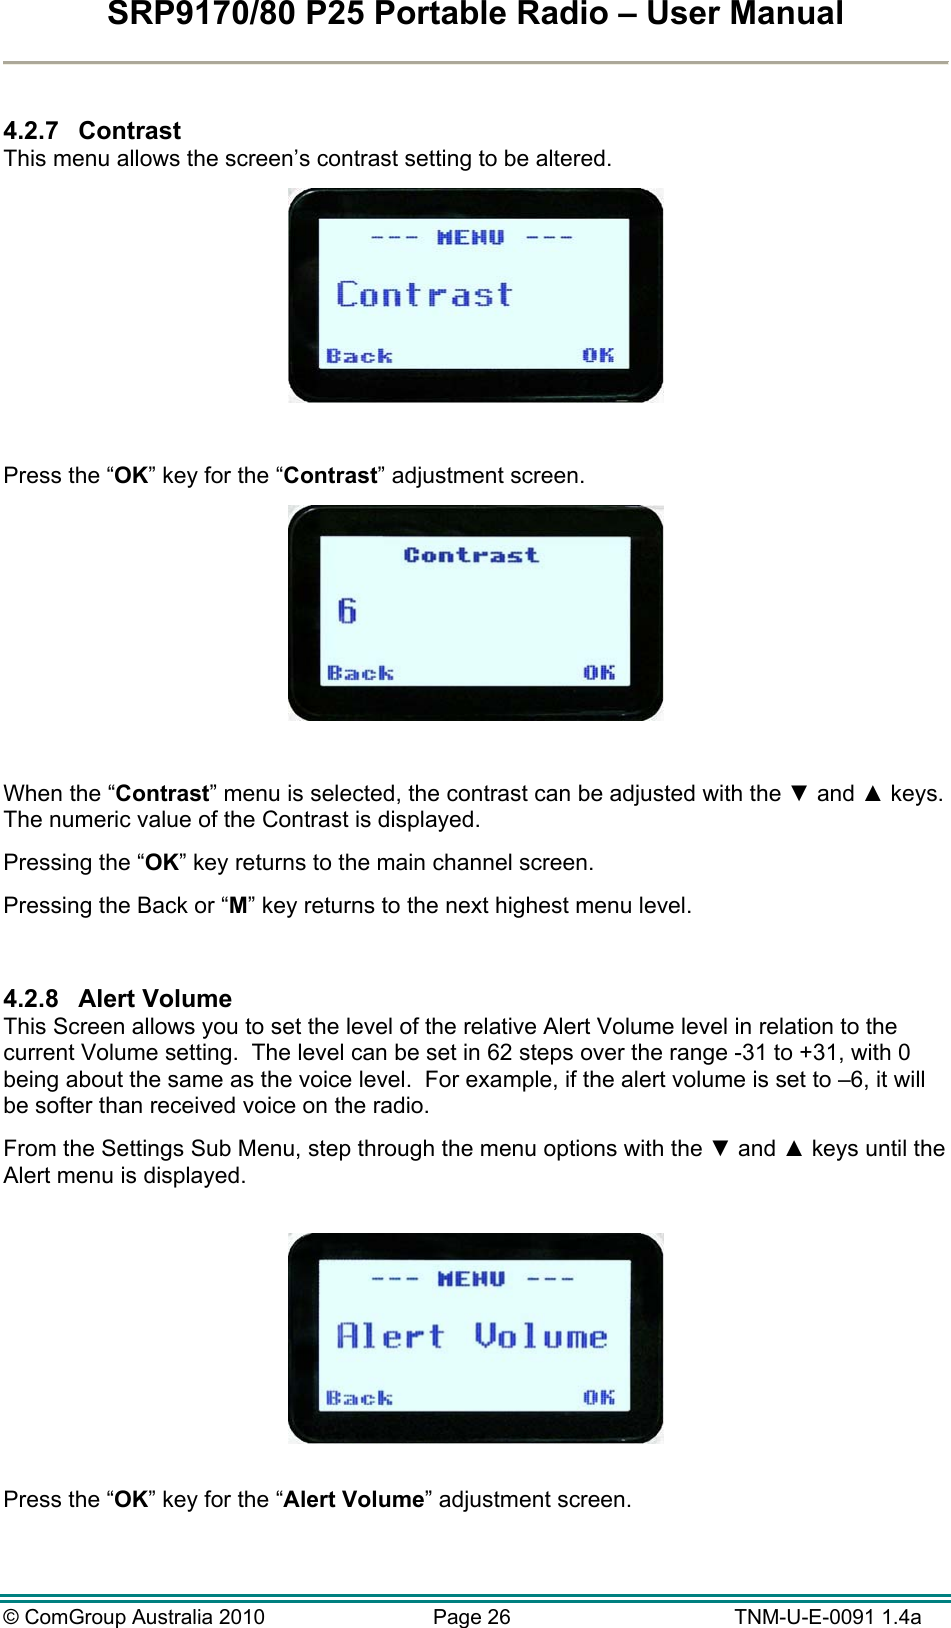 SRP9170/80 P25 Portable Radio – User Manual  © ComGroup Australia 2010  Page 26   TNM-U-E-0091 1.4a  4.2.7 Contrast This menu allows the screen’s contrast setting to be altered.    Press the “OK” key for the “Contrast” adjustment screen.   When the “Contrast” menu is selected, the contrast can be adjusted with the ▼ and ▲ keys.  The numeric value of the Contrast is displayed.  Pressing the “OK” key returns to the main channel screen.   Pressing the Back or “M” key returns to the next highest menu level.  4.2.8 Alert Volume This Screen allows you to set the level of the relative Alert Volume level in relation to the current Volume setting.  The level can be set in 62 steps over the range -31 to +31, with 0 being about the same as the voice level.  For example, if the alert volume is set to –6, it will be softer than received voice on the radio.   From the Settings Sub Menu, step through the menu options with the ▼ and ▲ keys until the Alert menu is displayed.    Press the “OK” key for the “Alert Volume” adjustment screen.  